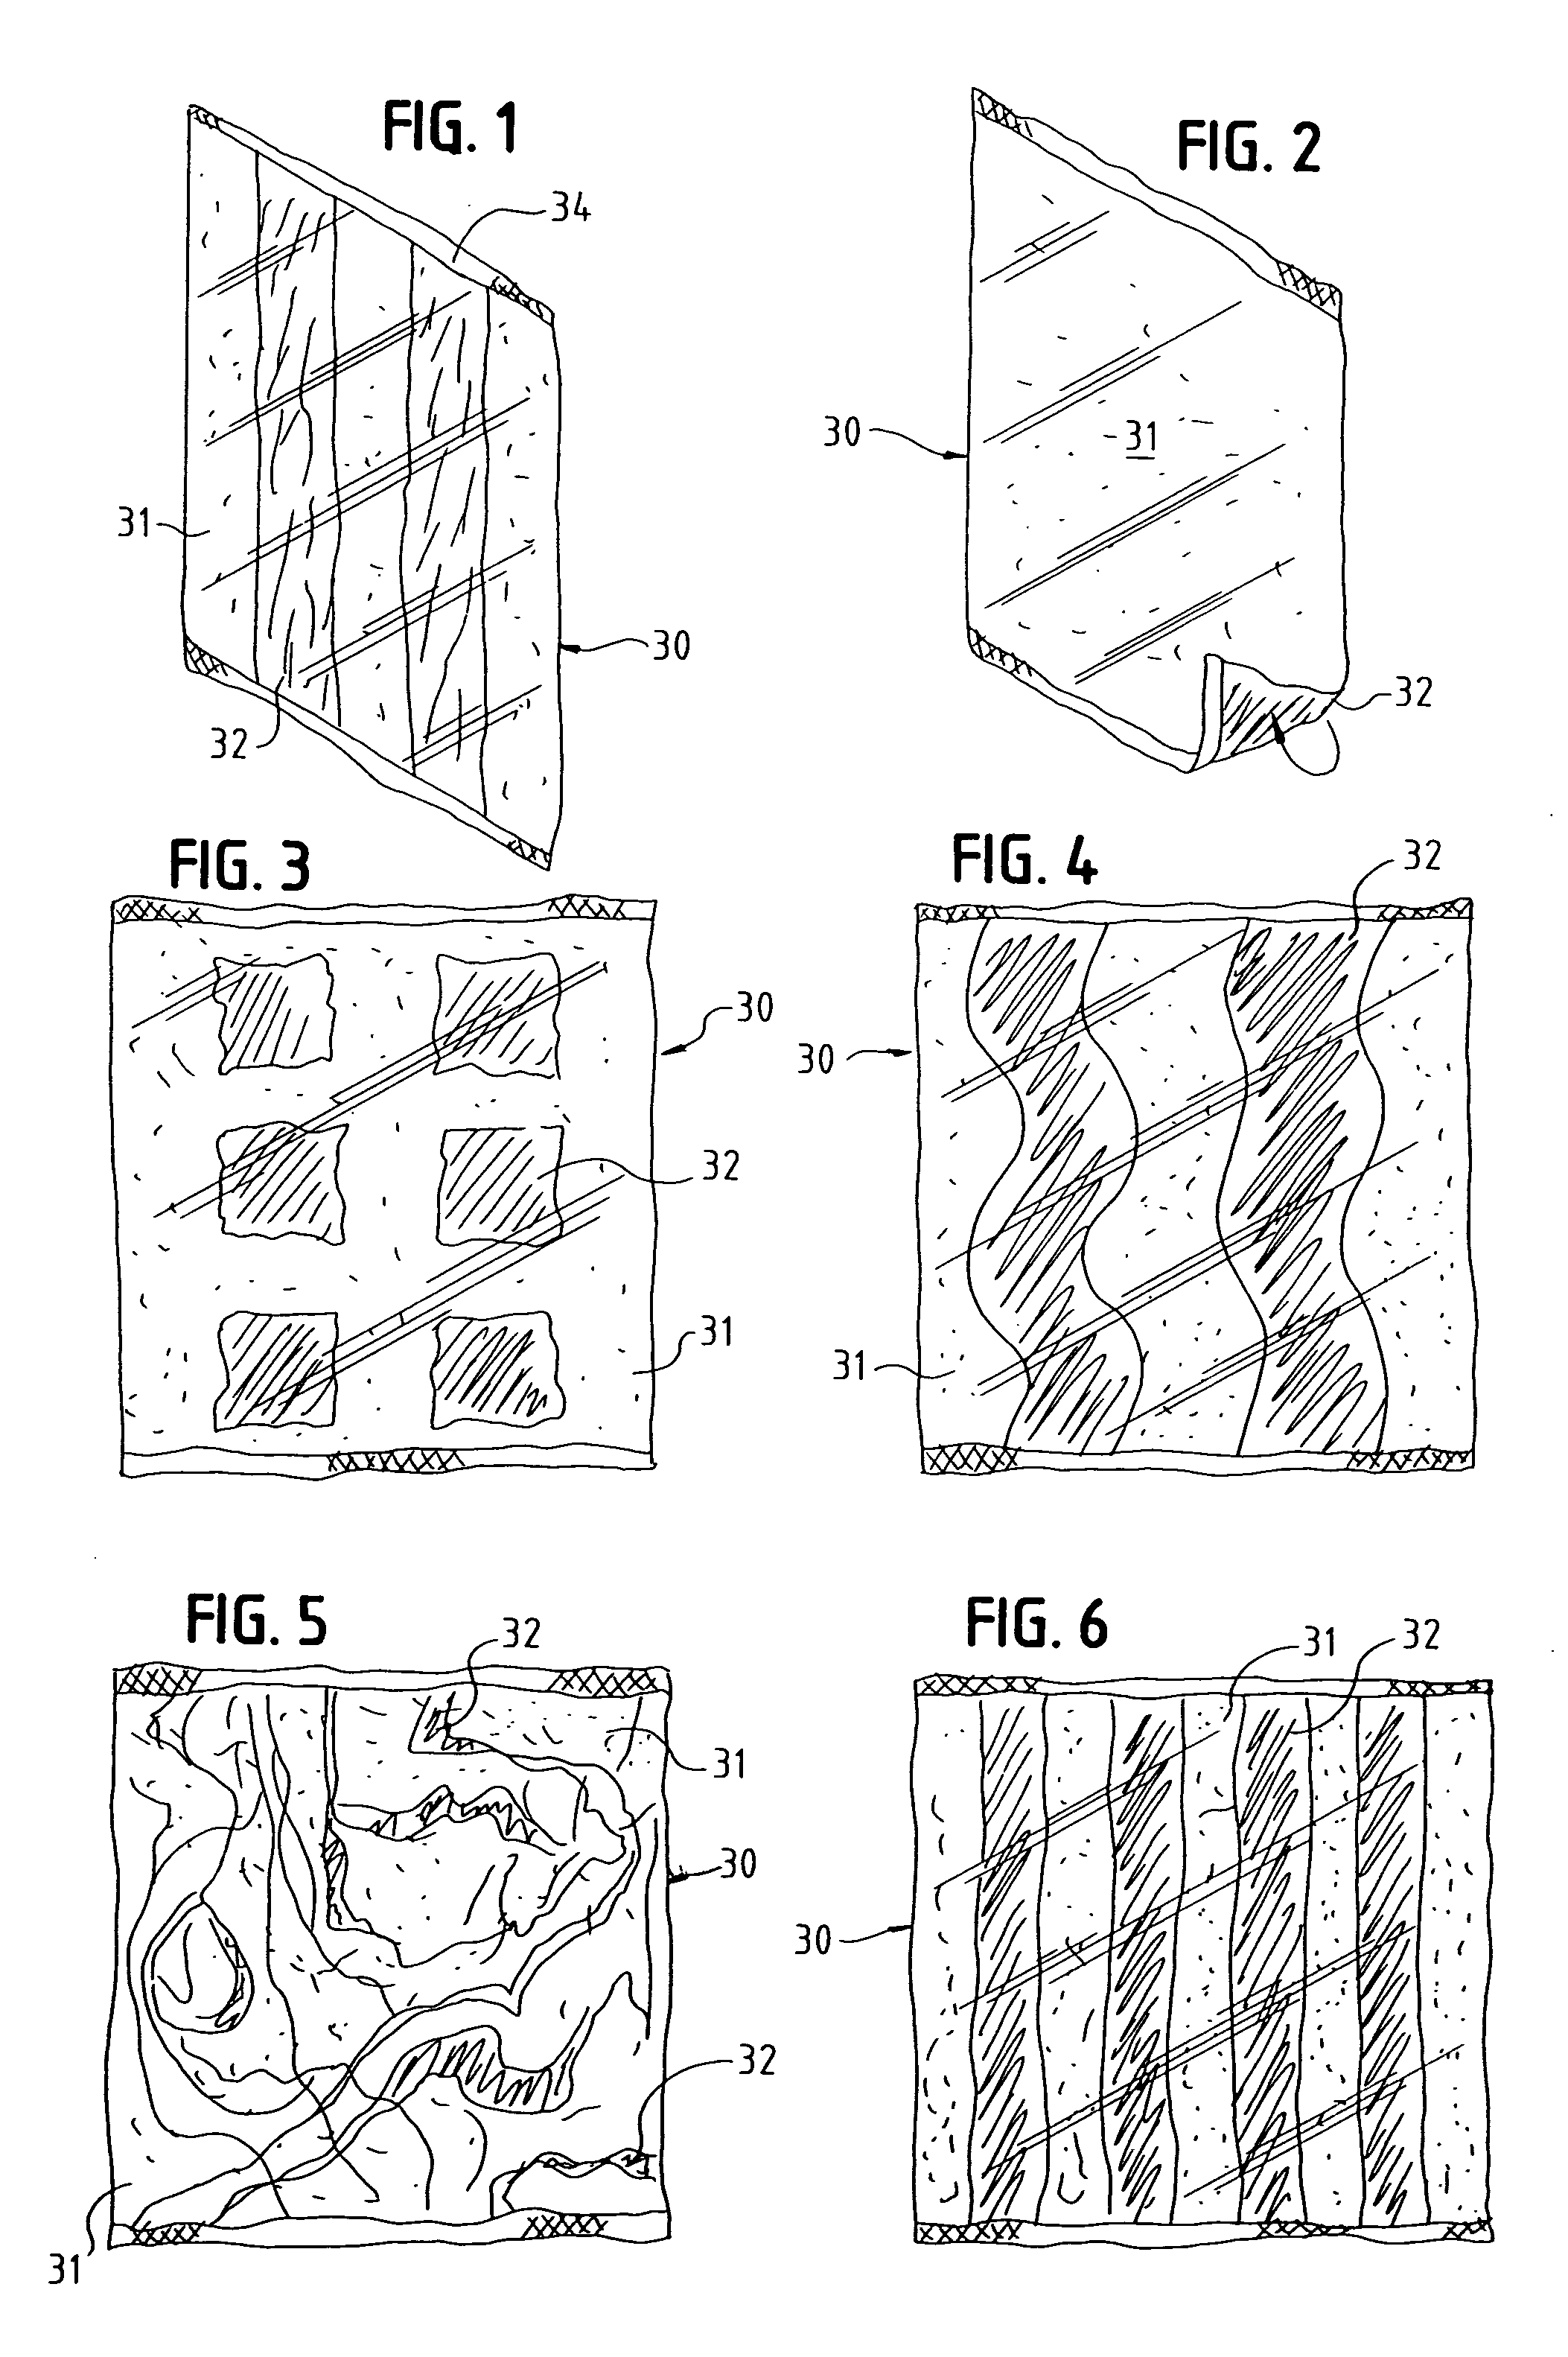 Food slice consisting of two or more food items, and processes for making and packaging same